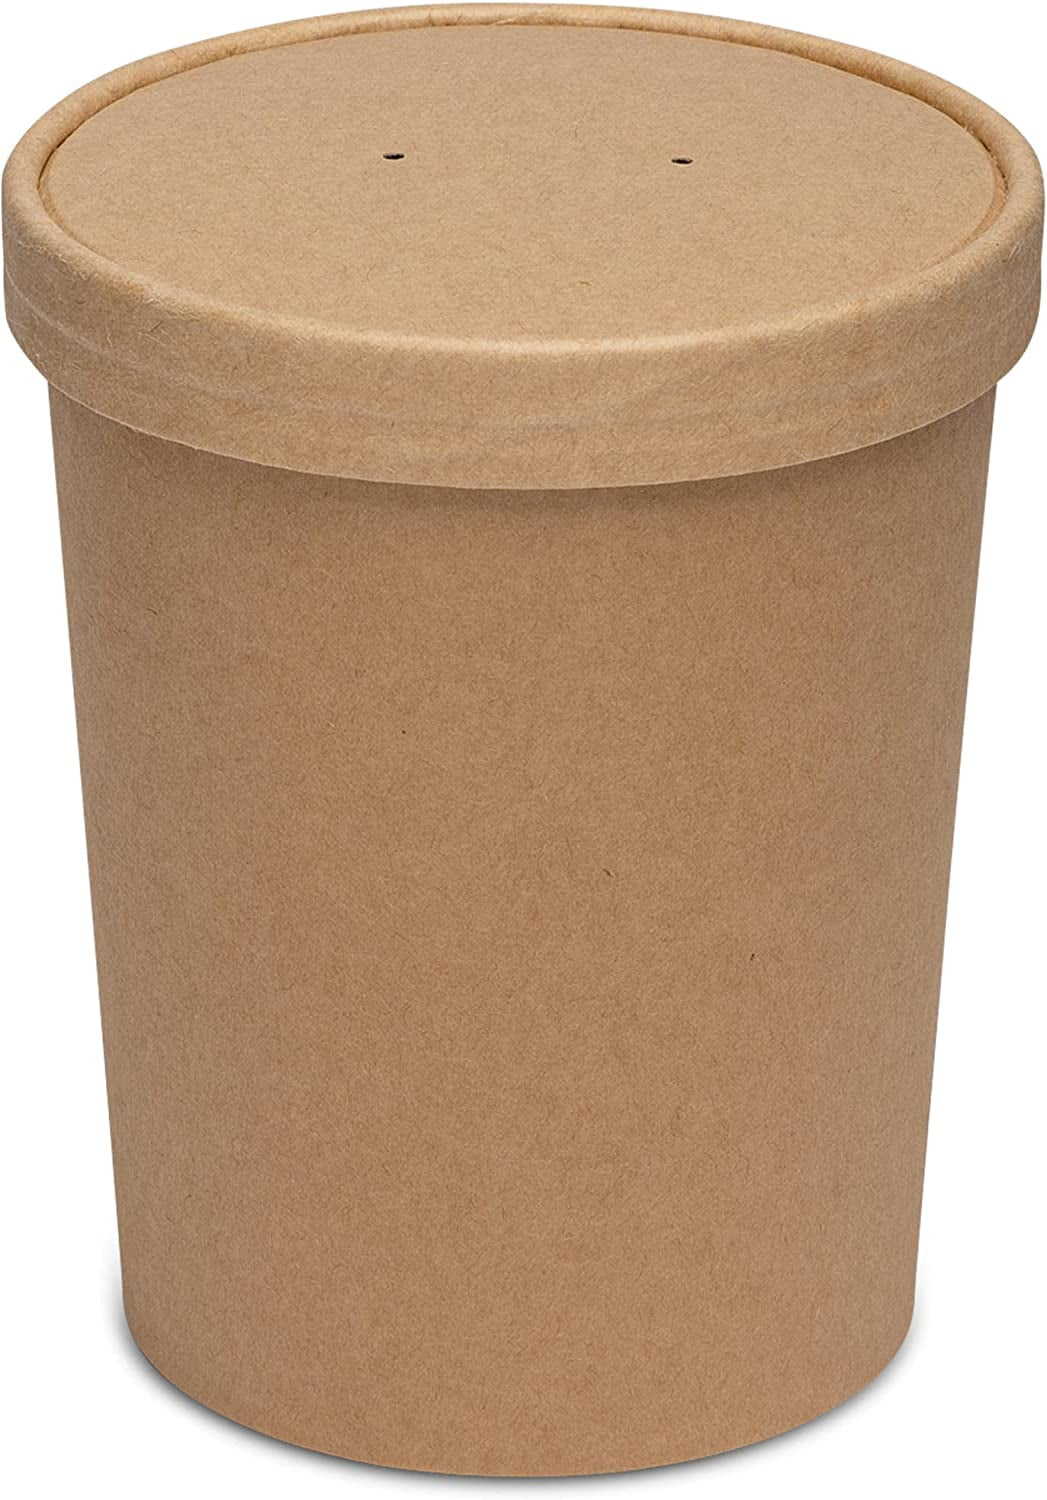  ePackageSupply 16 oz. (Pint) Containers with Lids